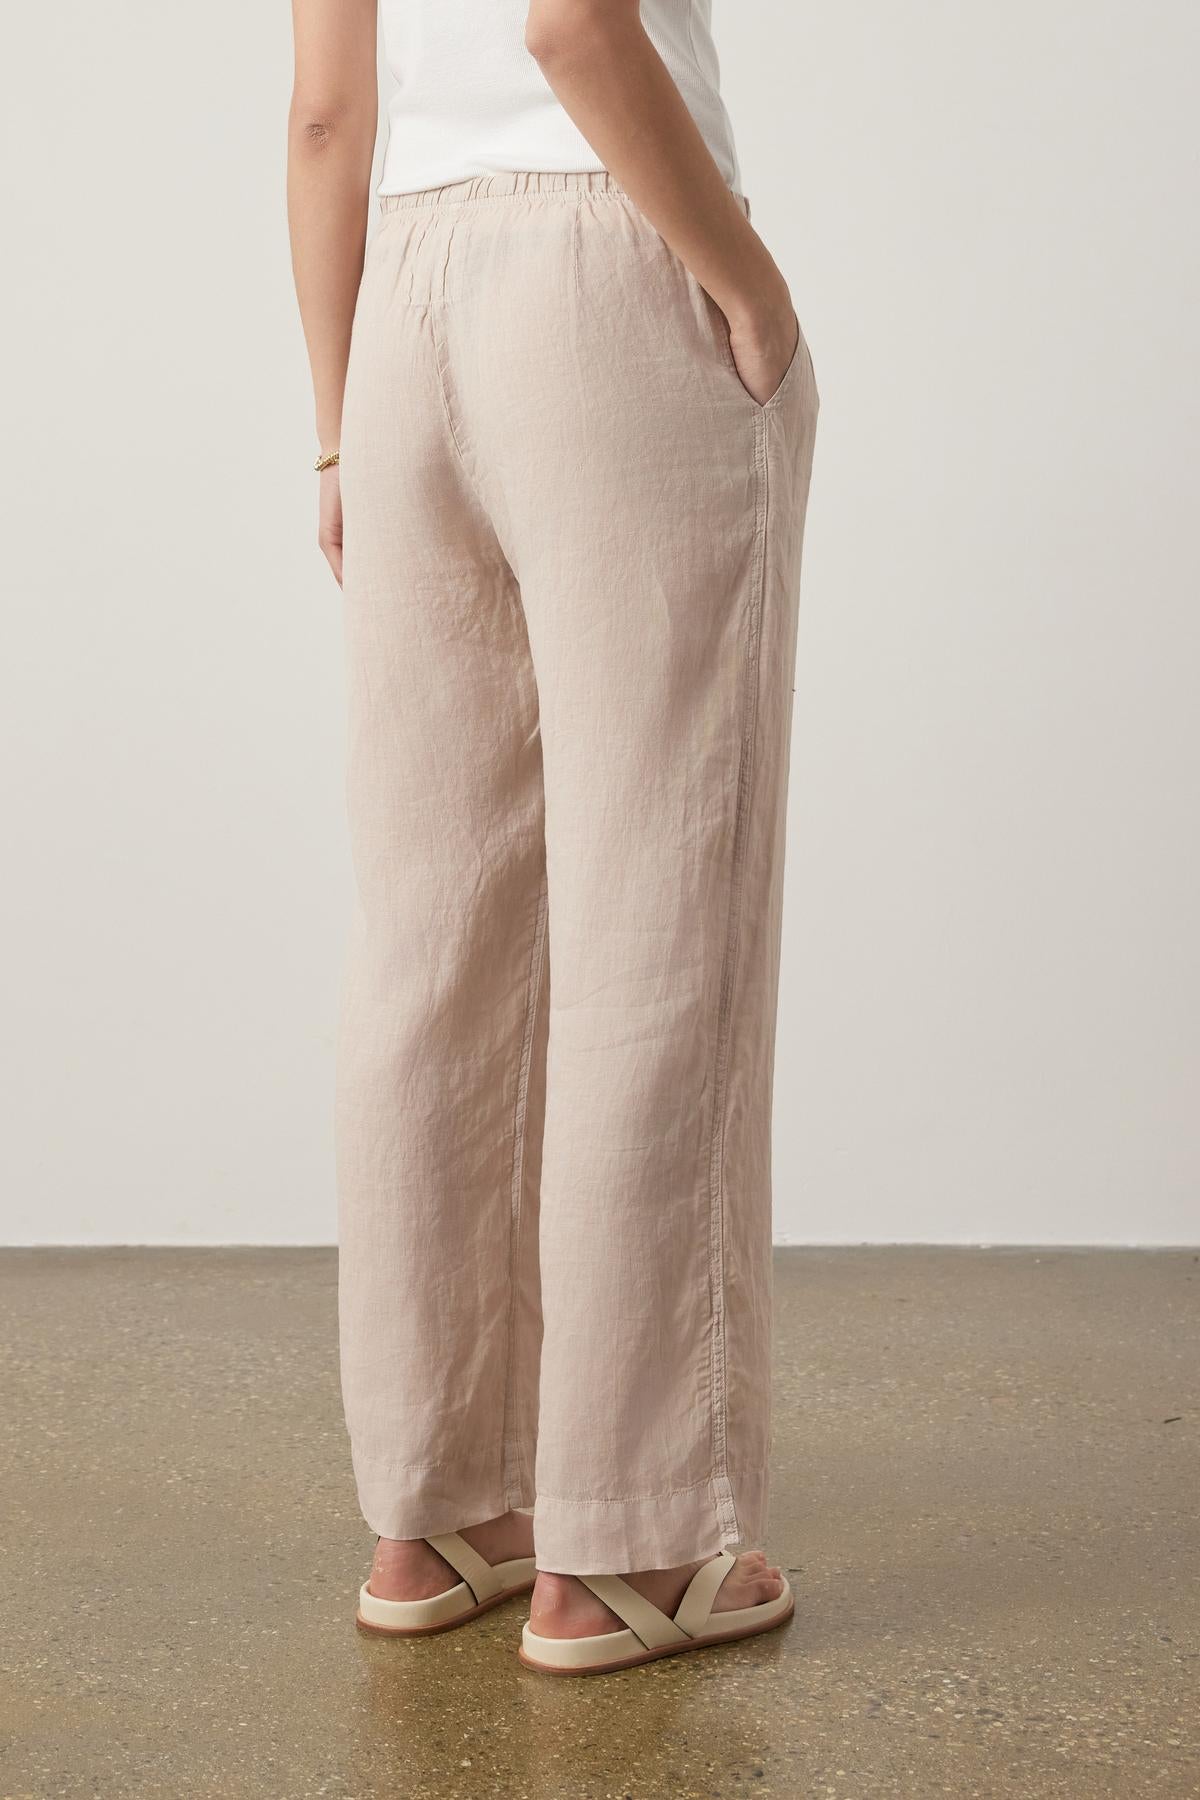 Woman in beige Velvet by Jenny Graham PICO LINEN PANT and white sandals, standing with back to the camera, focusing on the clothing fit and texture.-36863287558337